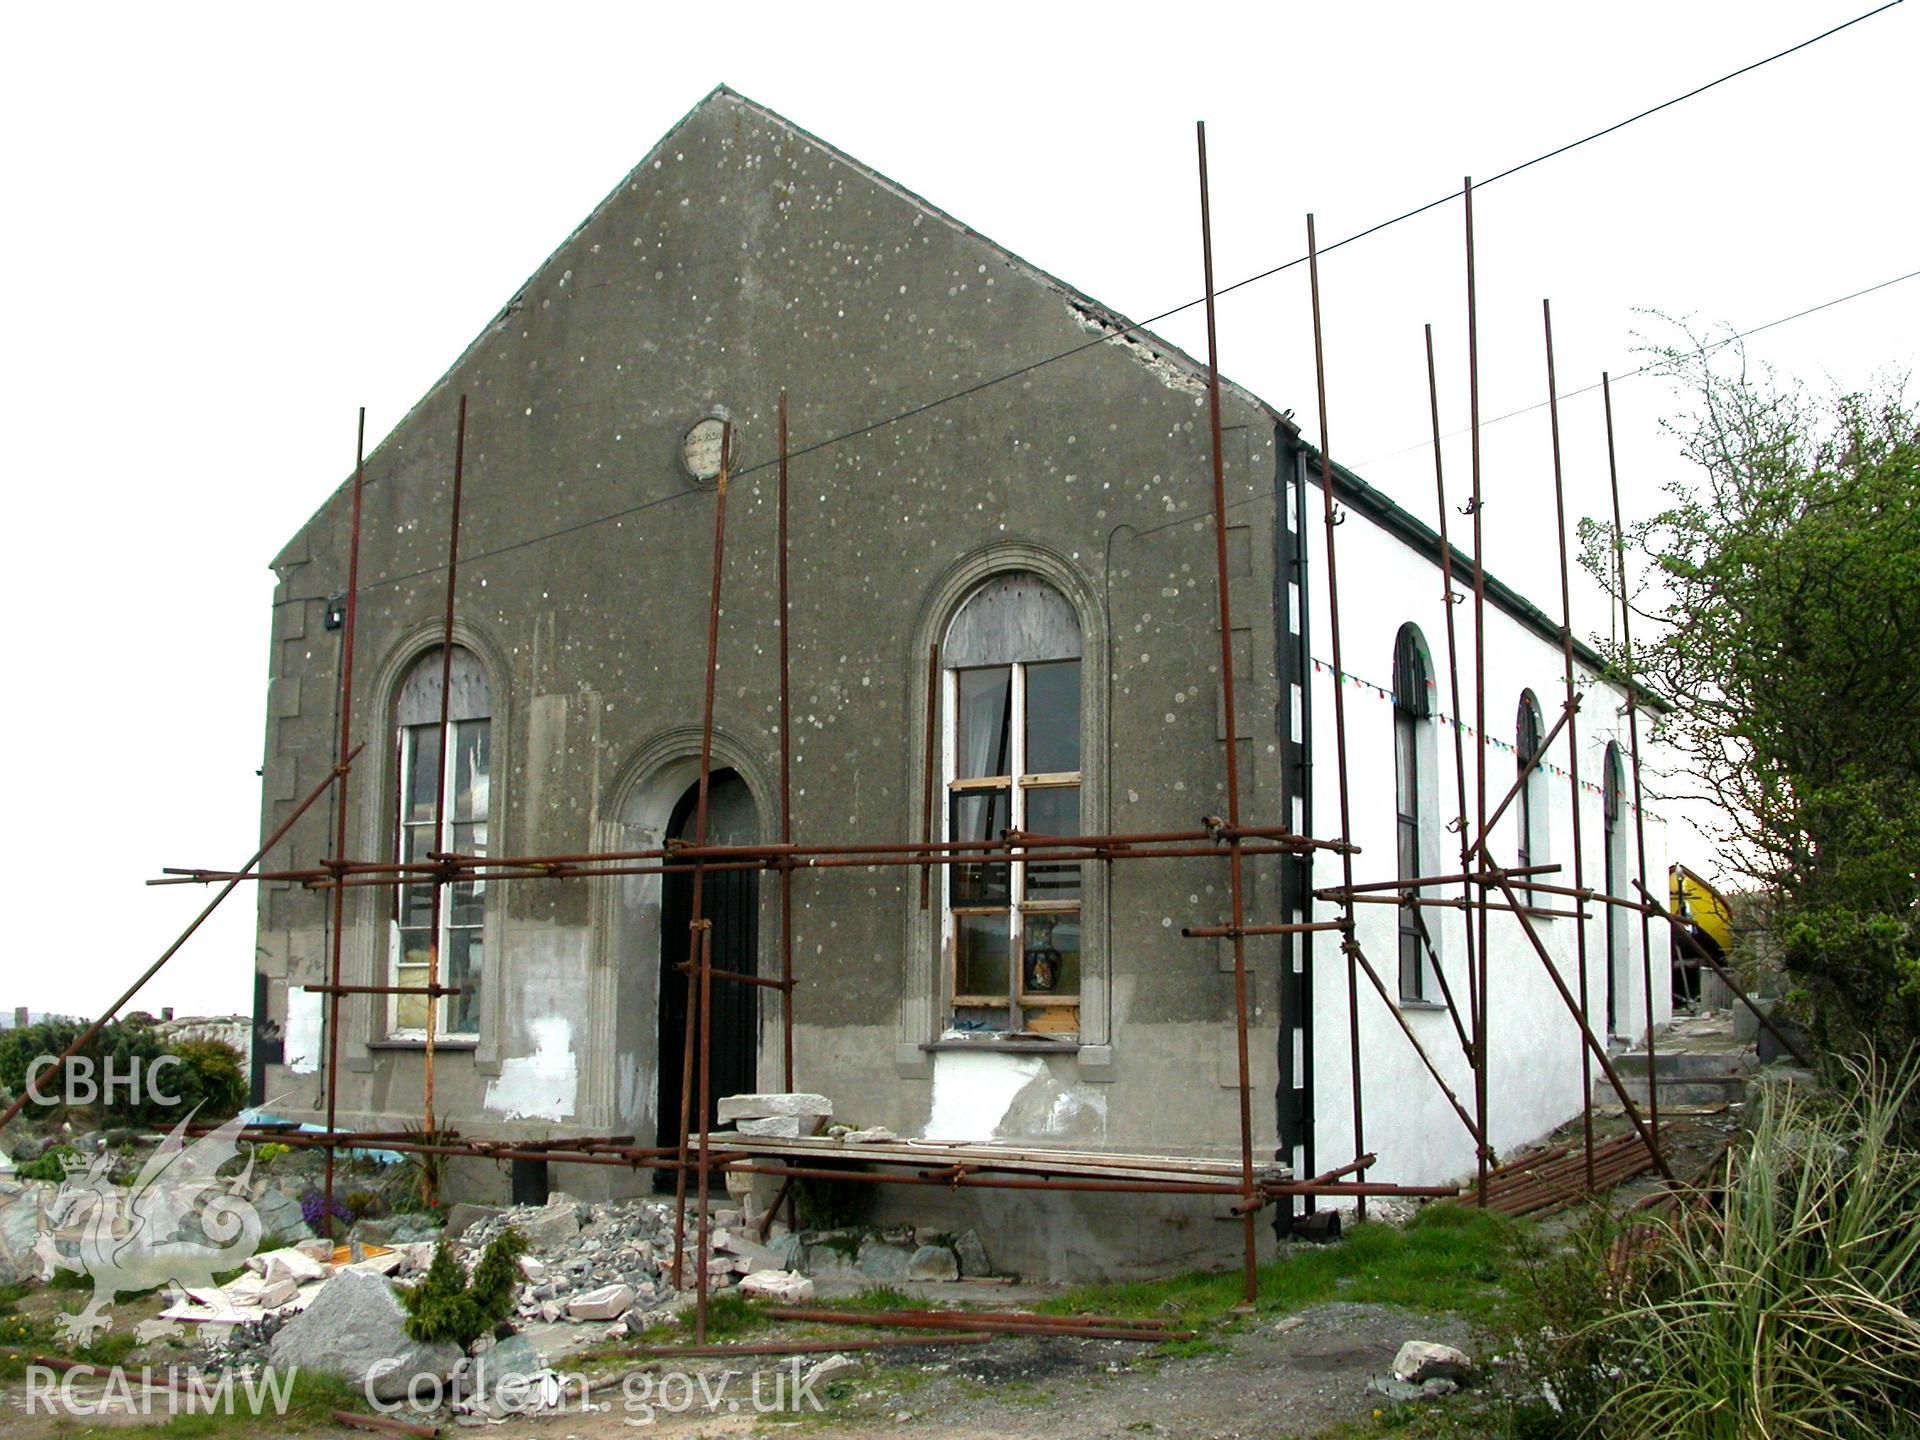 Chapel front and right-hand facades